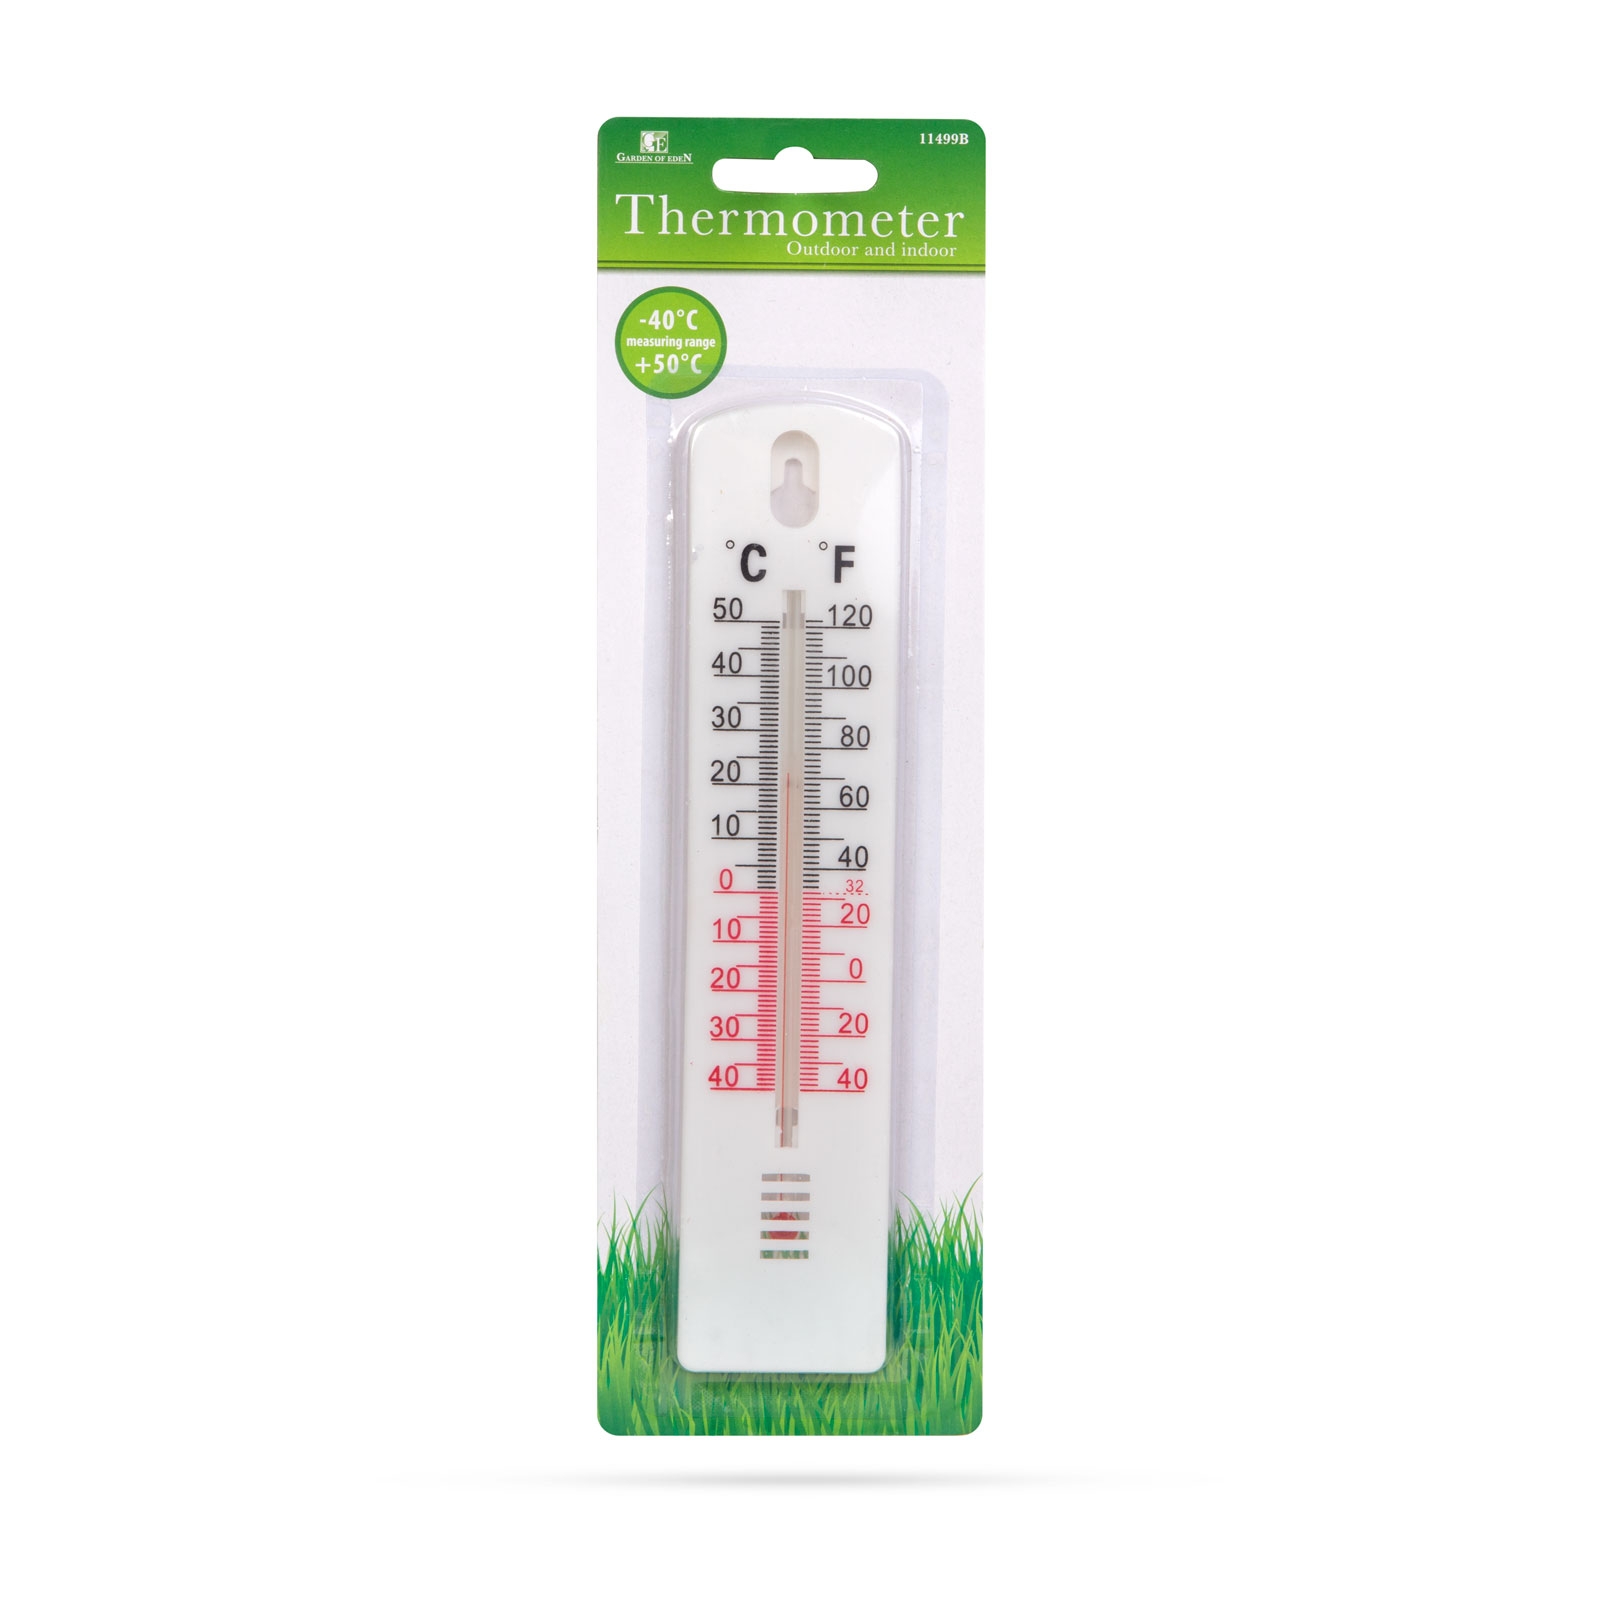 Outdoor and indoor thermometer thumb